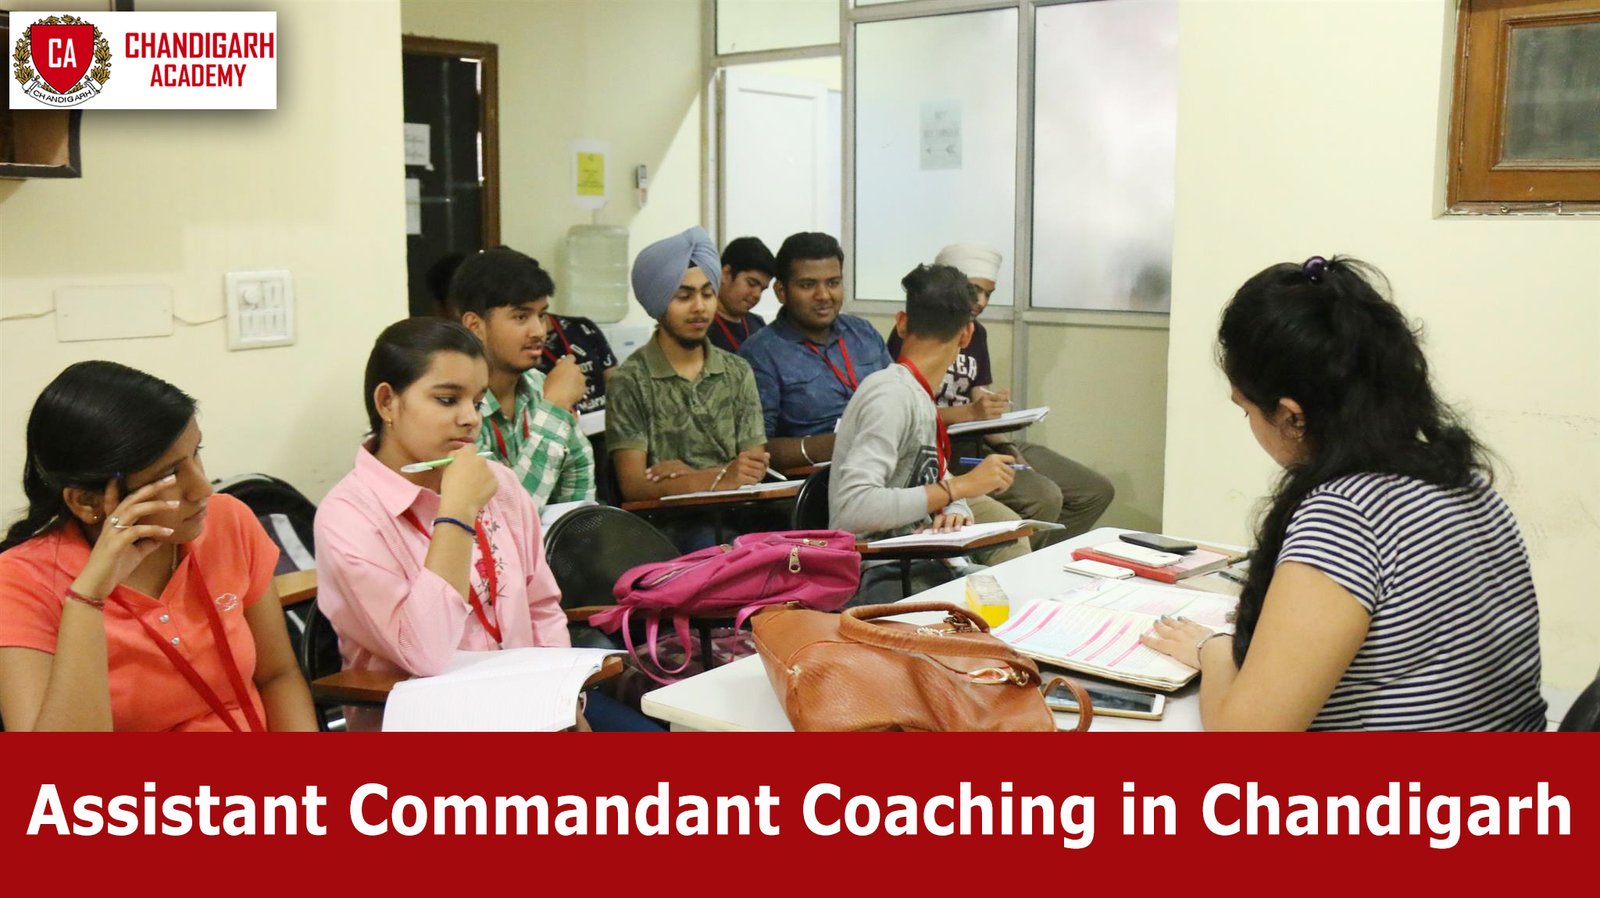 Assistant Commandant Coaching in Chandigarh